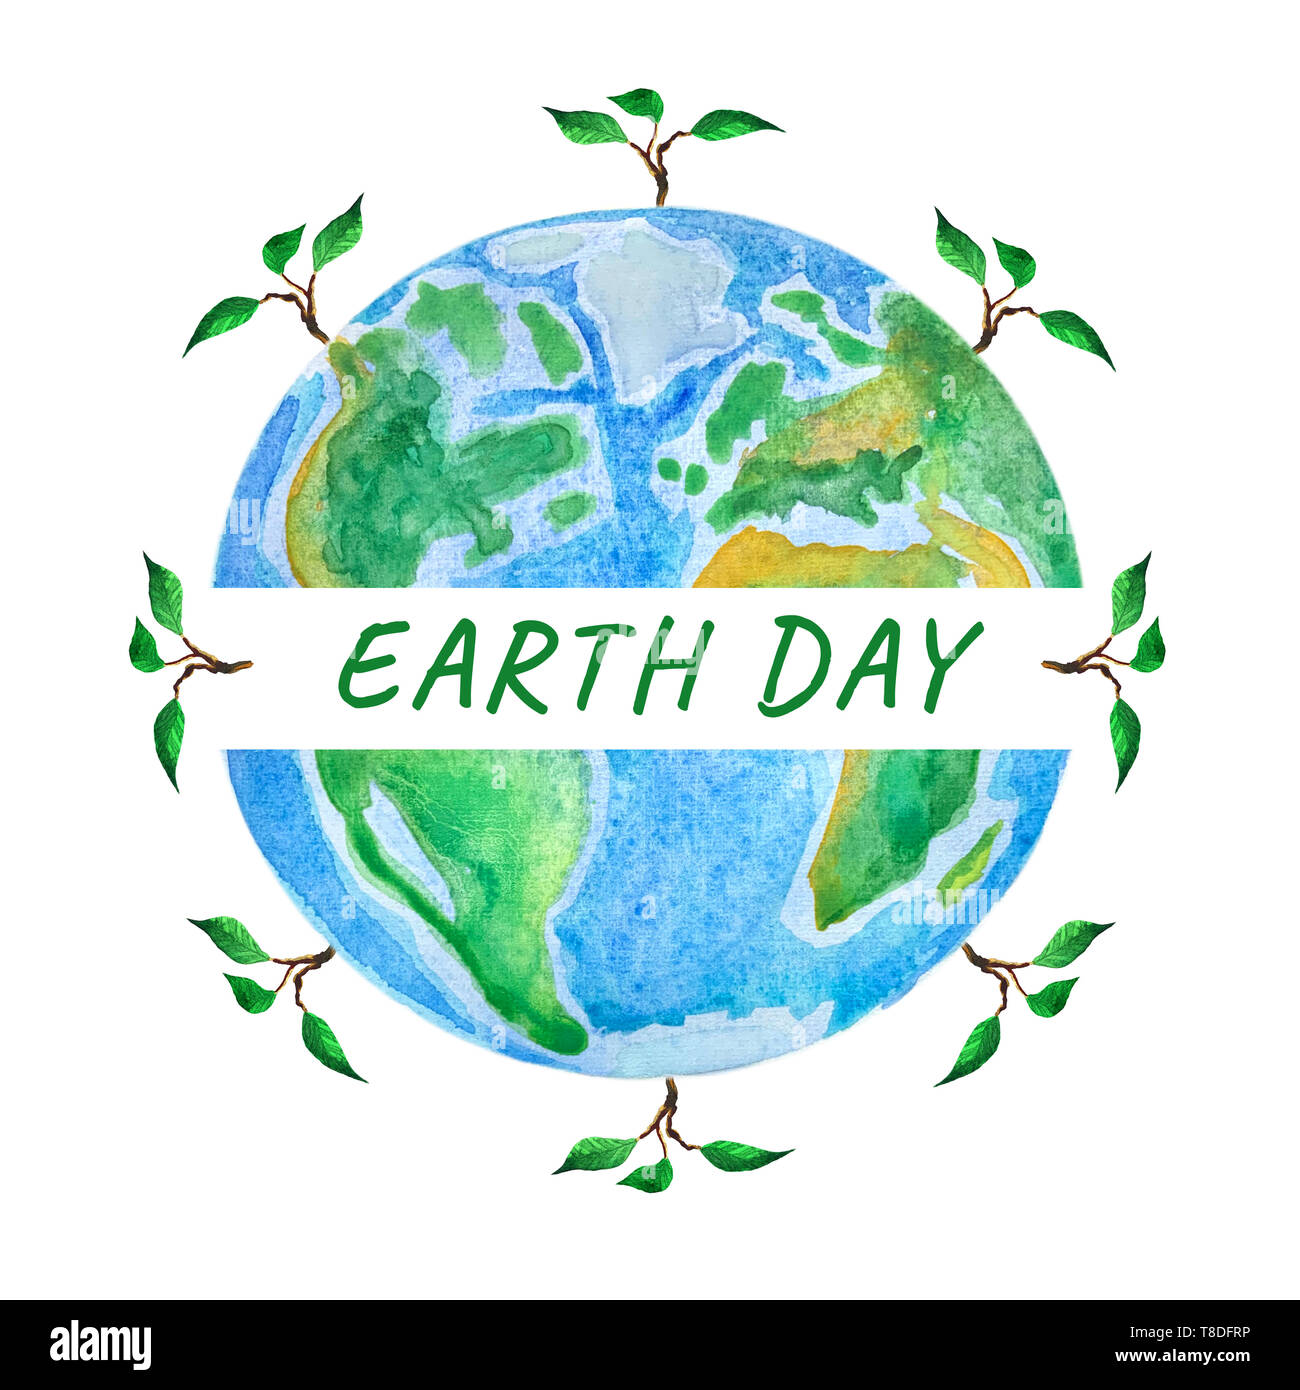 Earth day. Globe with tree sprout watercolor painting Stock Photo